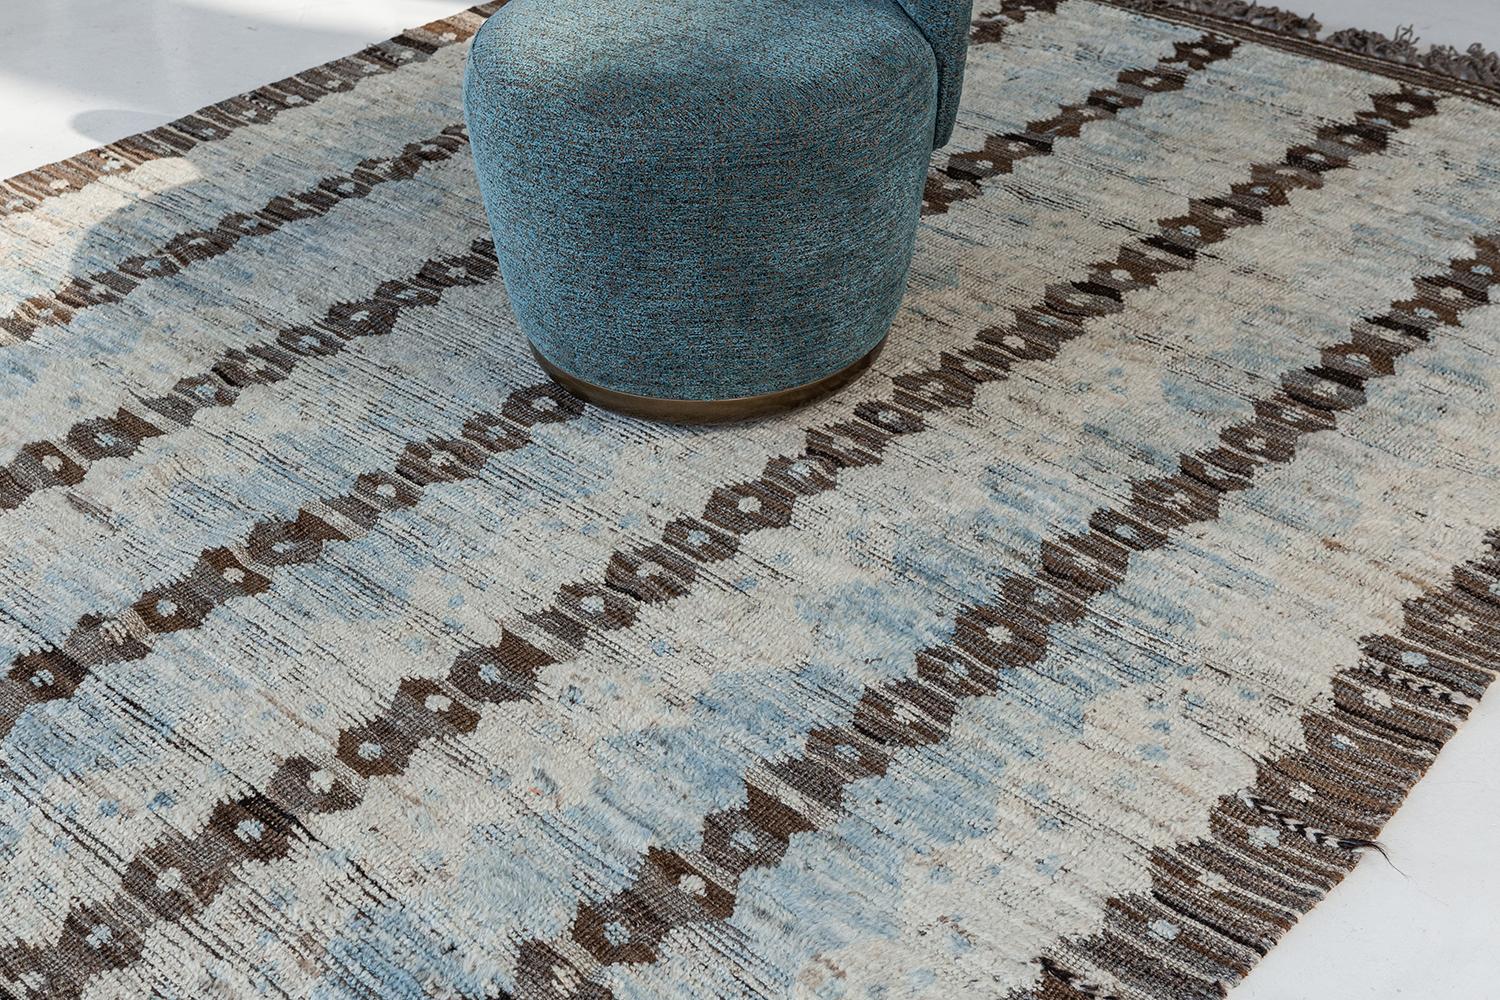 The 'Modlina' rug is a handwoven wool piece inspired by vintage Scandinavian design elements and recreated for the modern design world. The rug's shag balance and harmony, hand woven with a neutral flat weave and unique piles of peach and natural